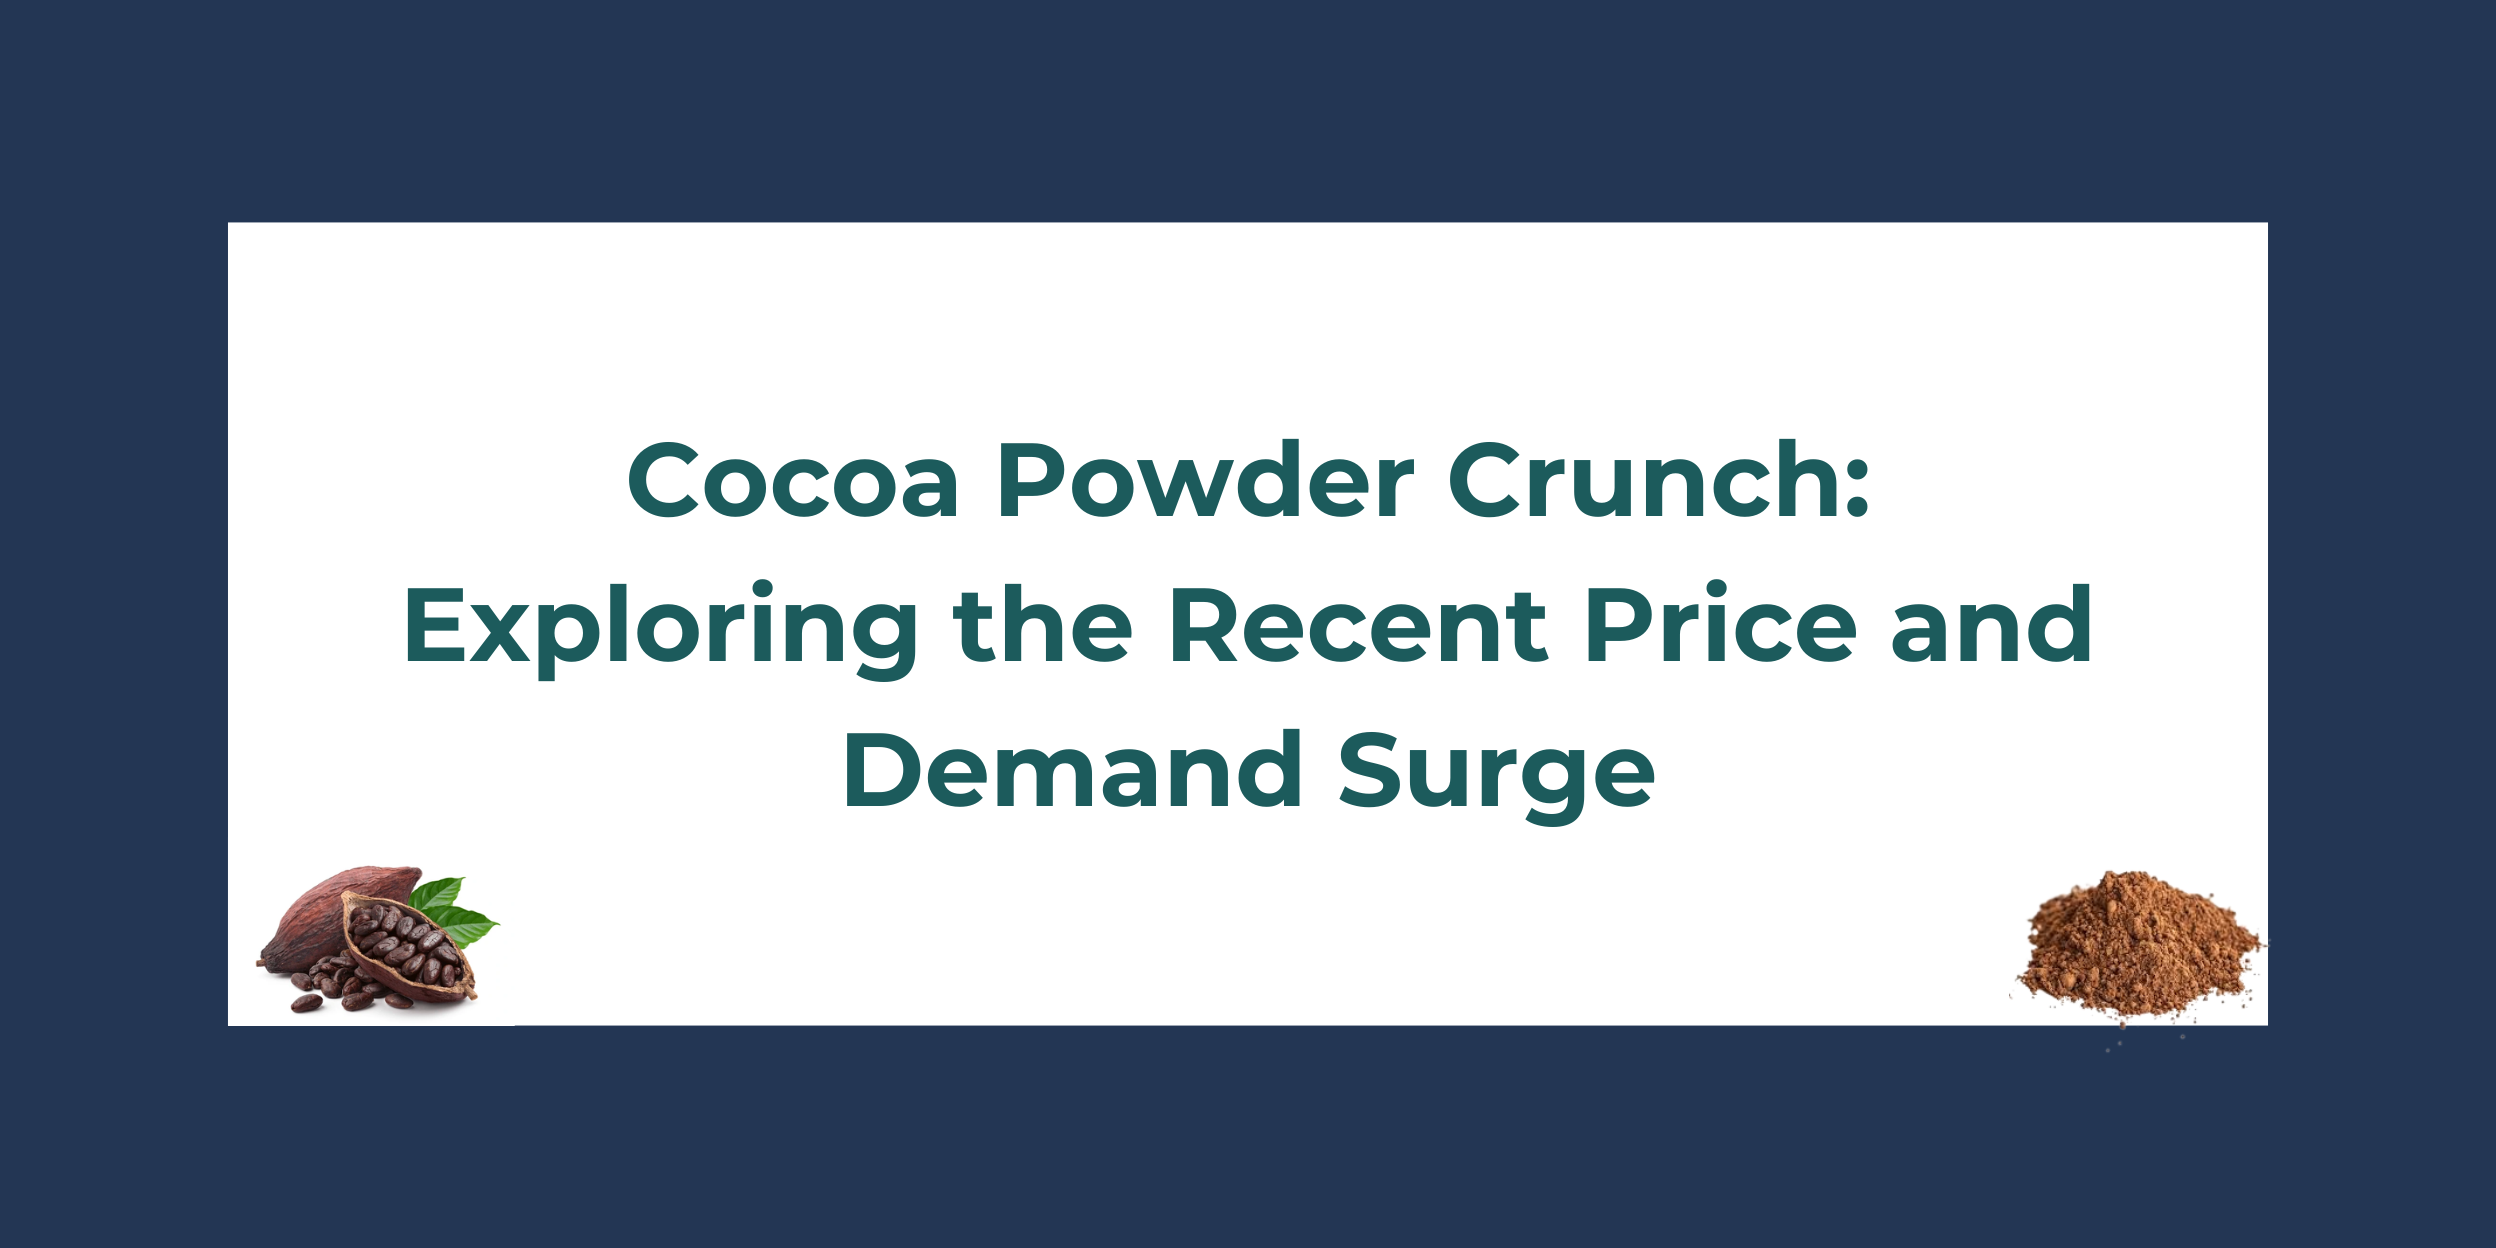 Cocoa Powder Crunch: Exploring the Recent Price and Demand Surge